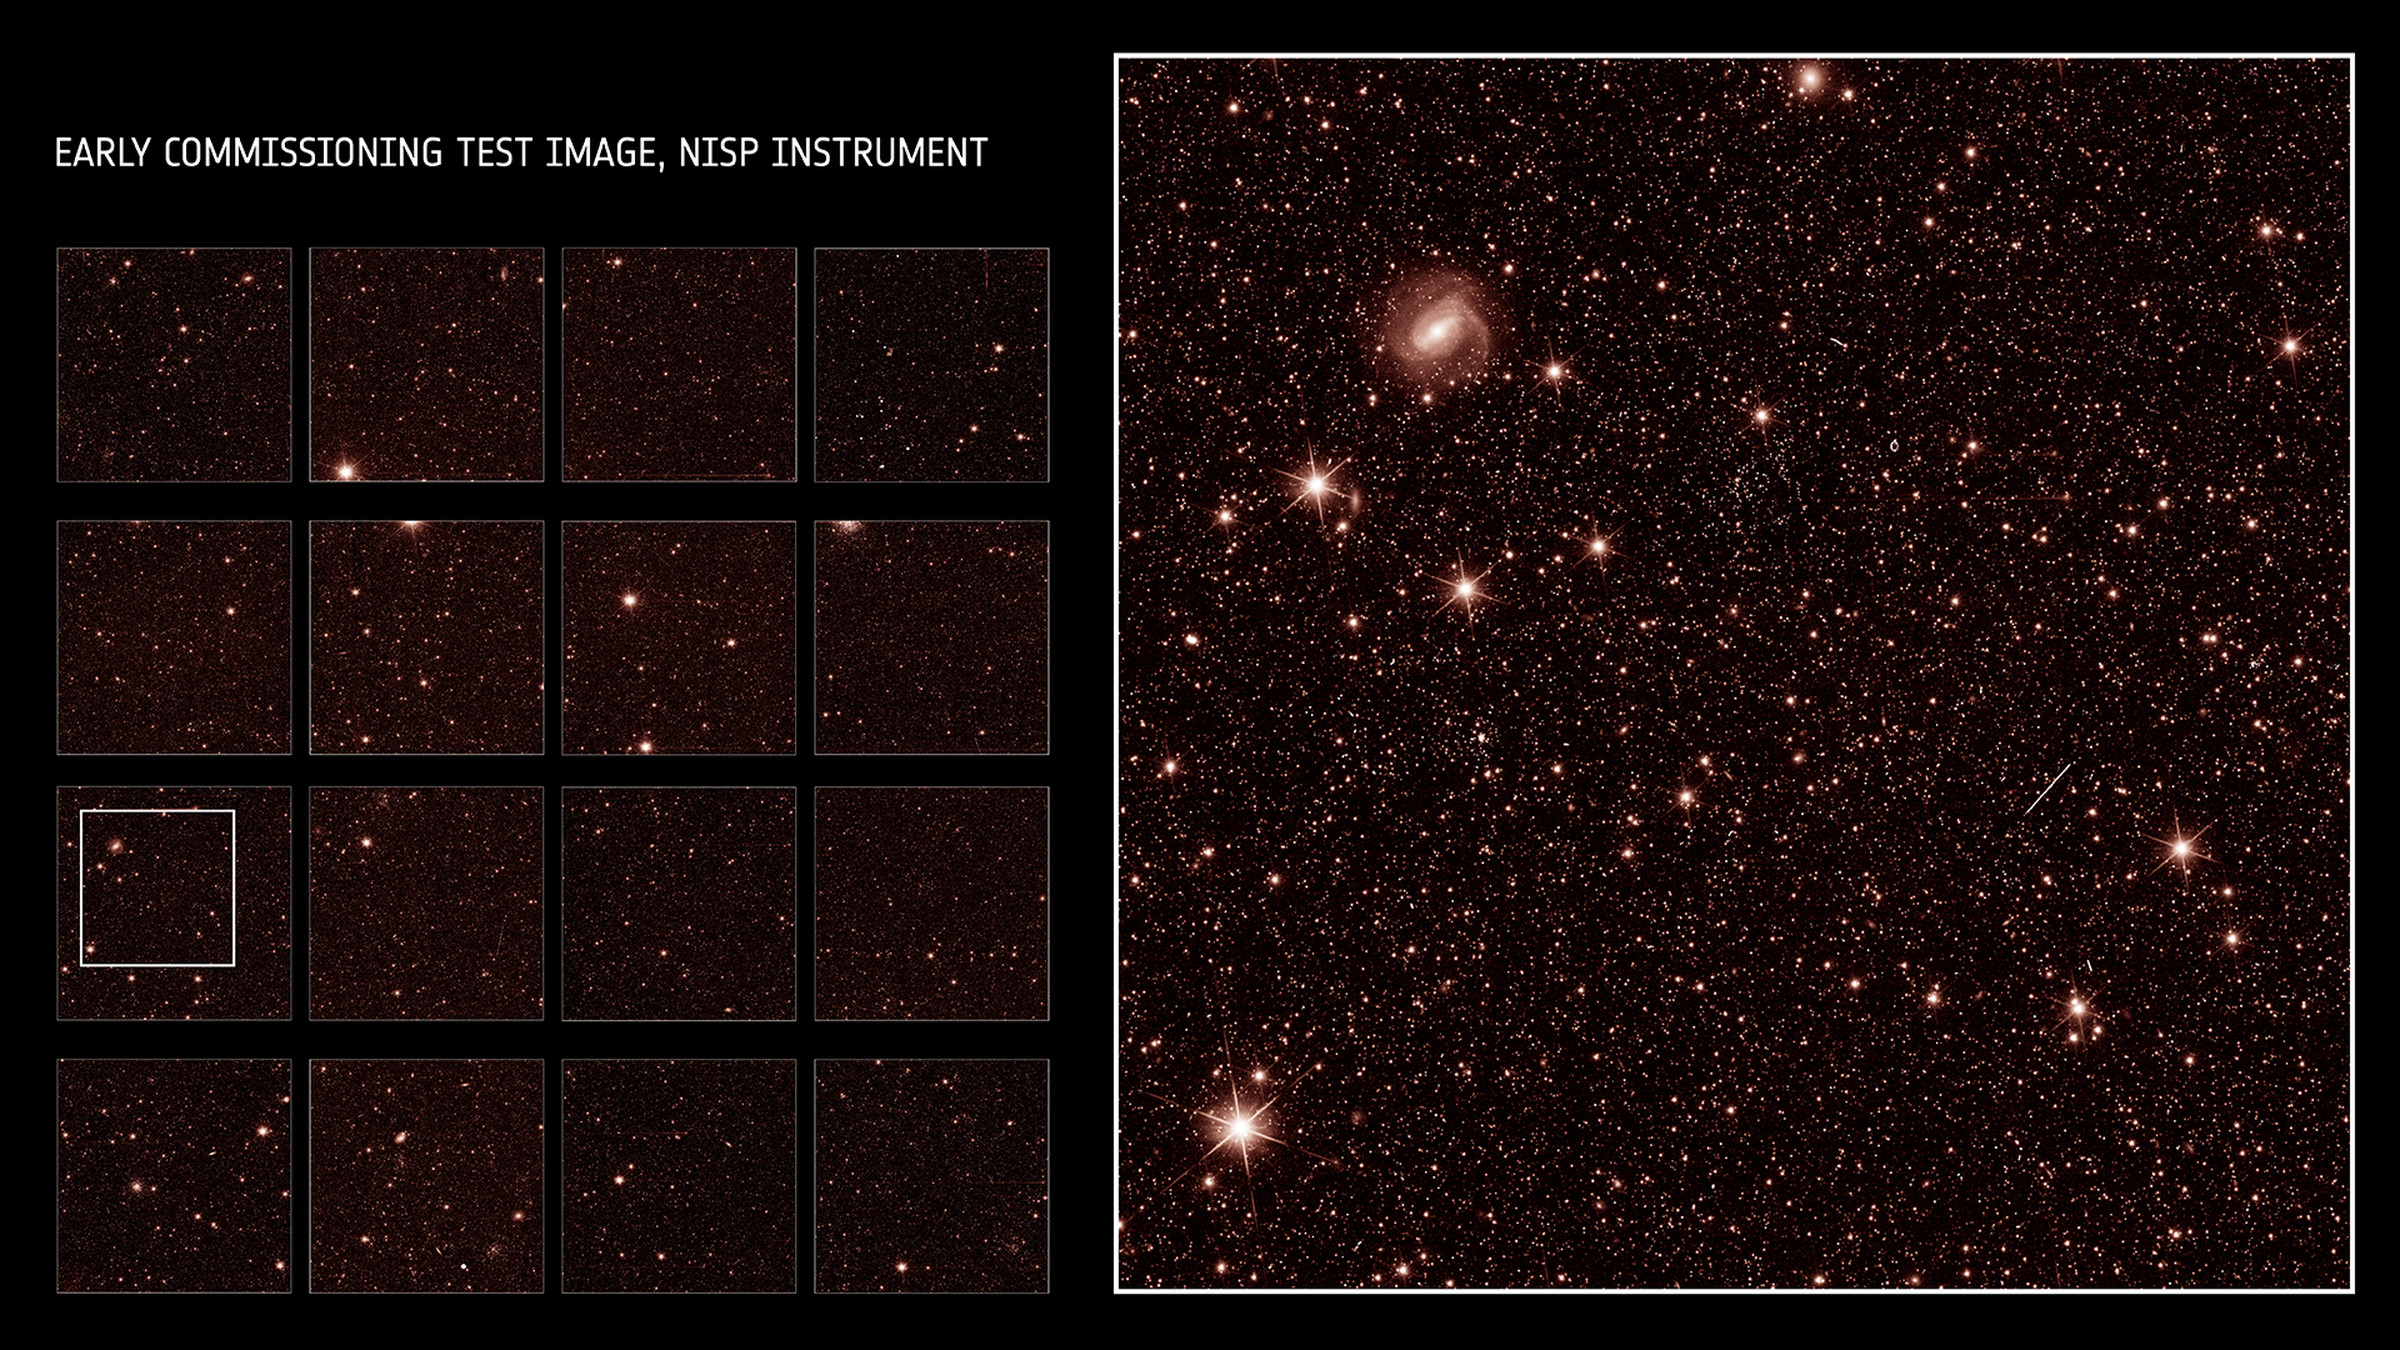 A grid of thumbnails (left) showing infrared images taken by Euclid, with a close-up of one image on the right.